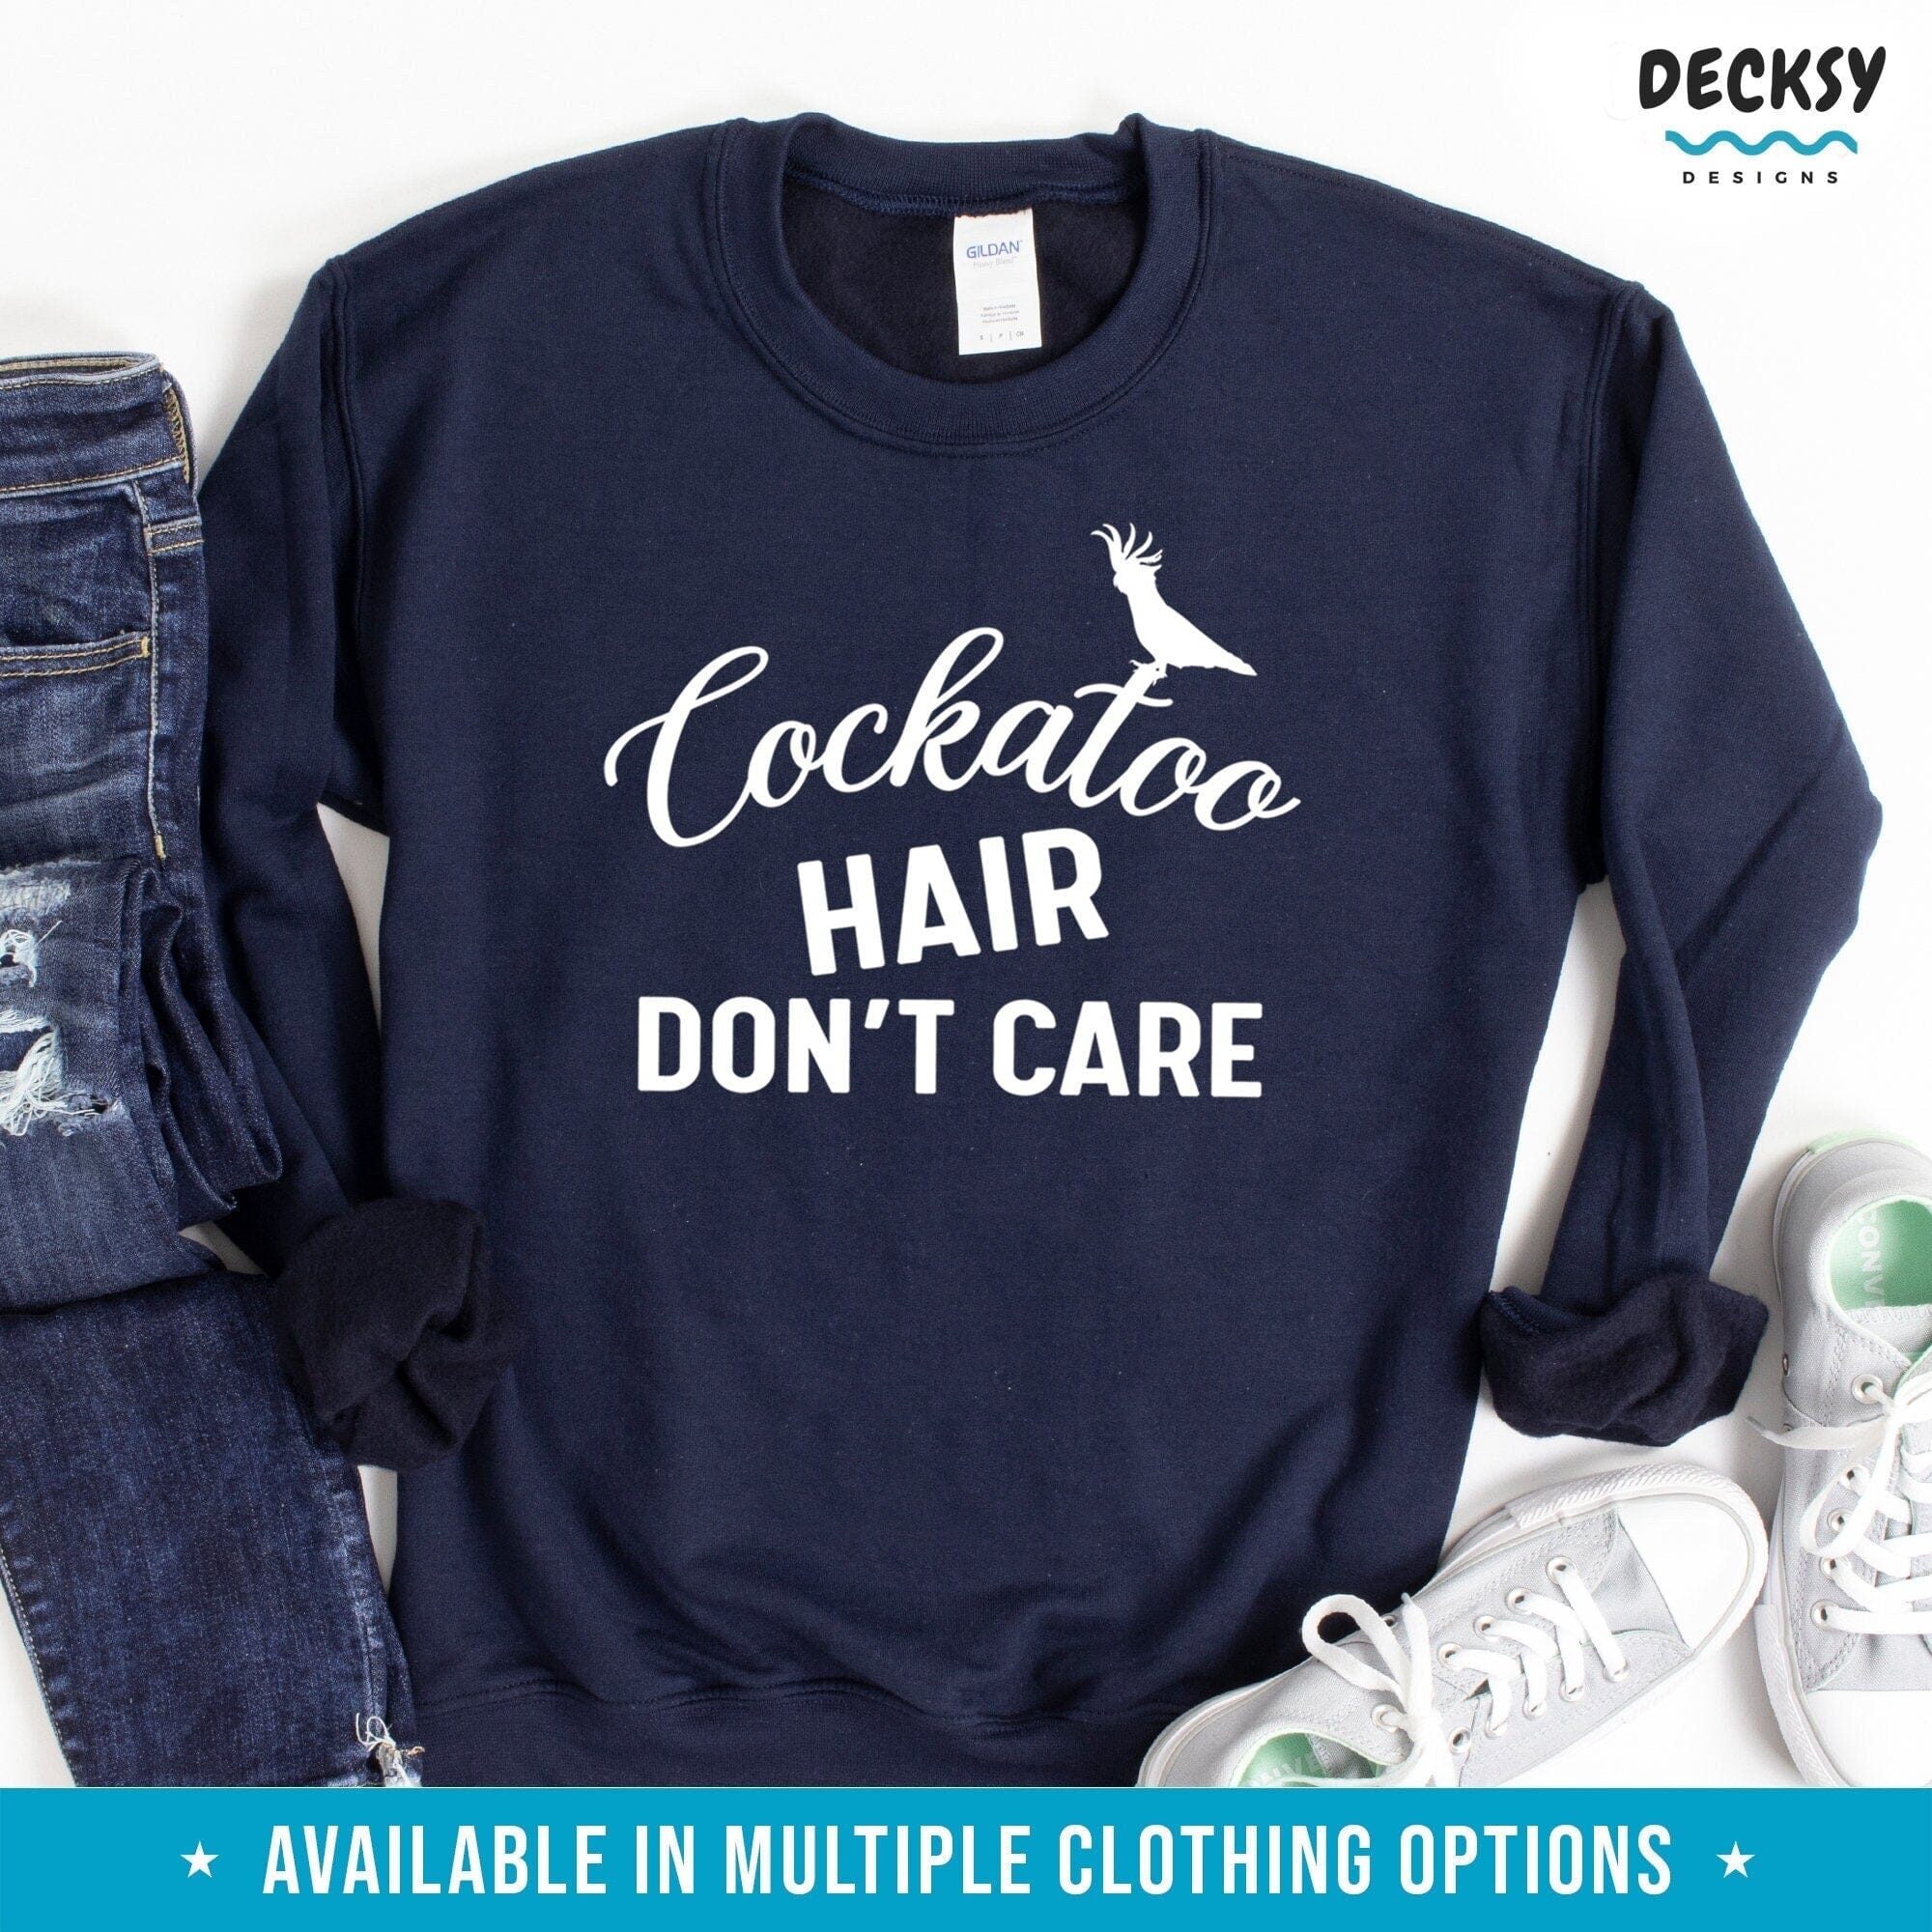 Cockatoo Shirt, Gift for Cockatoo Owner, Funny Bird Lover Sweatshirt Hoodie-Clothing:Gender-Neutral Adult Clothing:Tops & Tees:T-shirts:Graphic Tees-DecksyDesigns